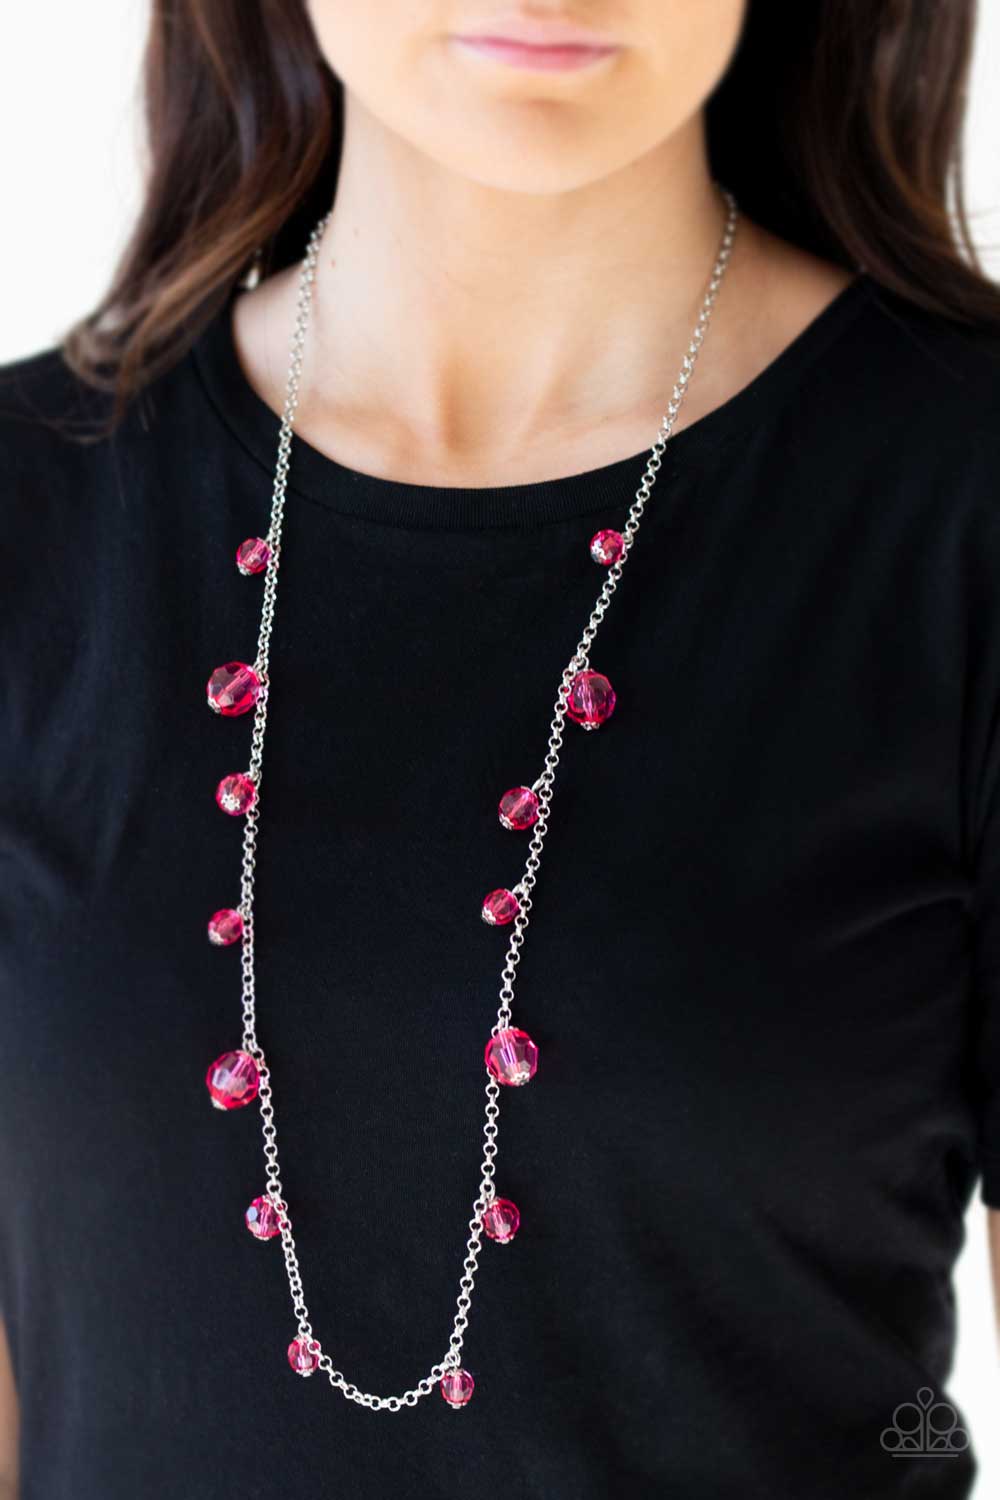 GLOW-Rider Pink Necklace - Paparazzi Accessories - model -CarasShop.com - $5 Jewelry by Cara Jewels